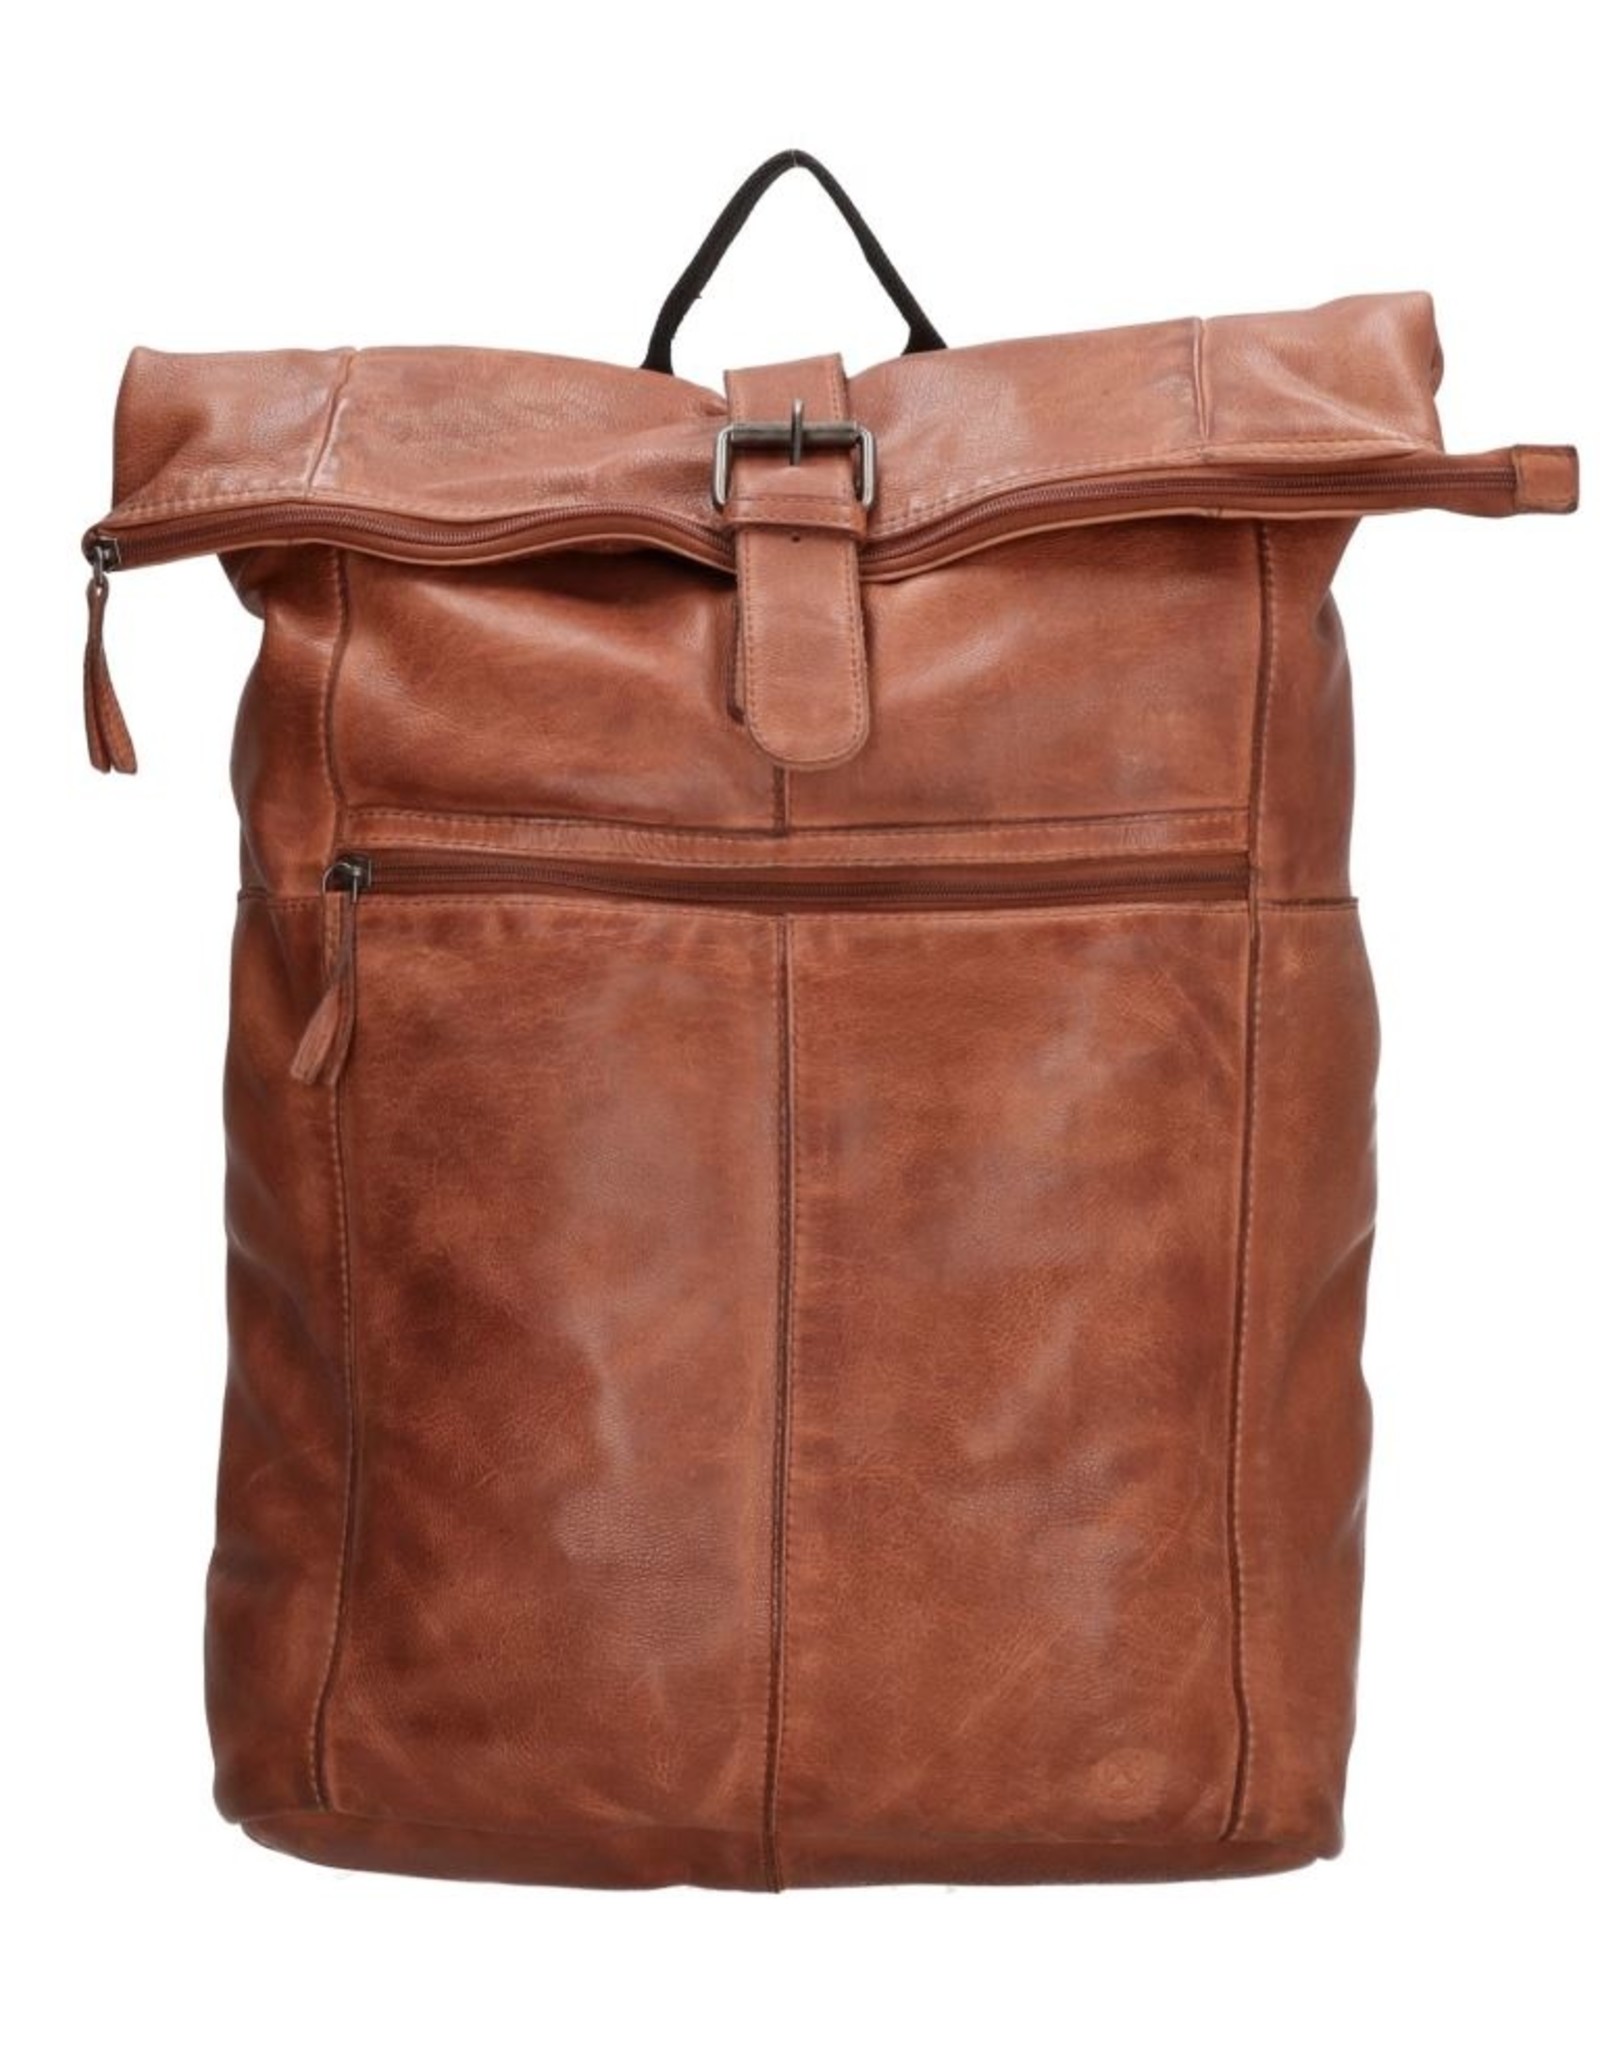 Hide & Stitches Leather backpacks  and leather shoppers - Hide & Stitches Rolltop Backpack 15,6" - 17,3" dark cognac